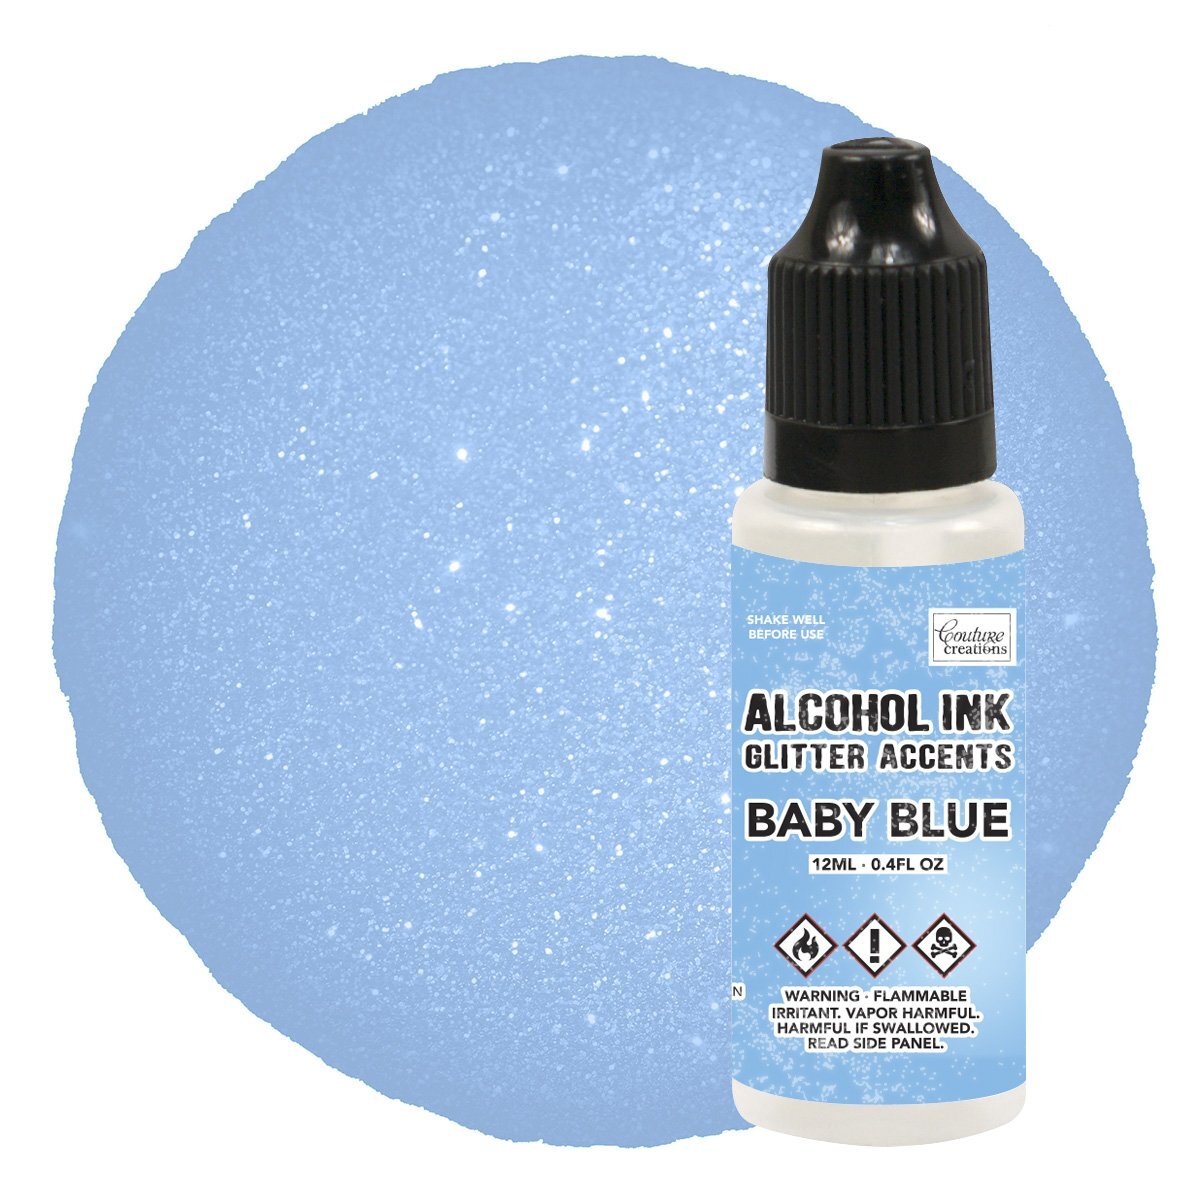 Couture Creations Alcohol Ink Glitter Accents 12ml Baby Blue